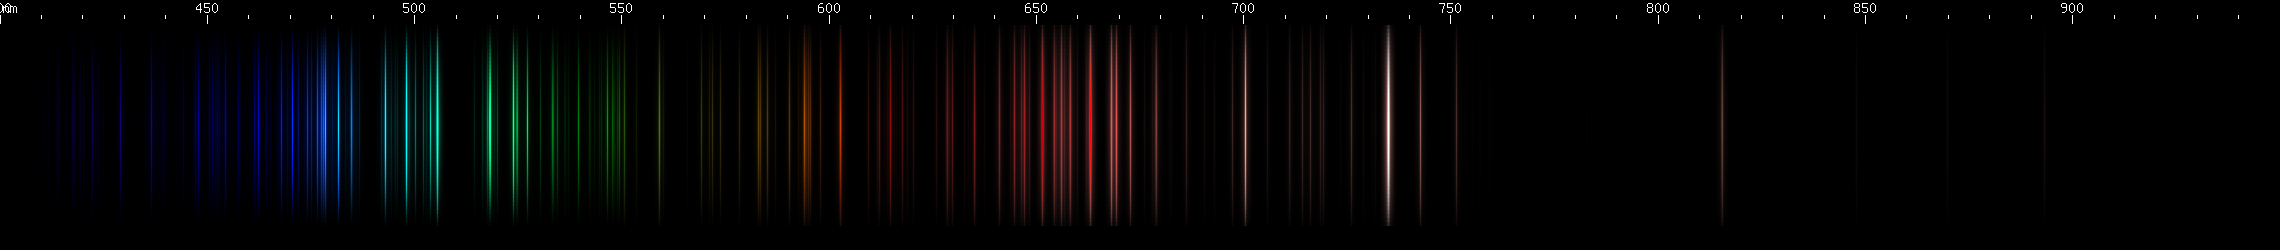 Spectral lines of Bromine.